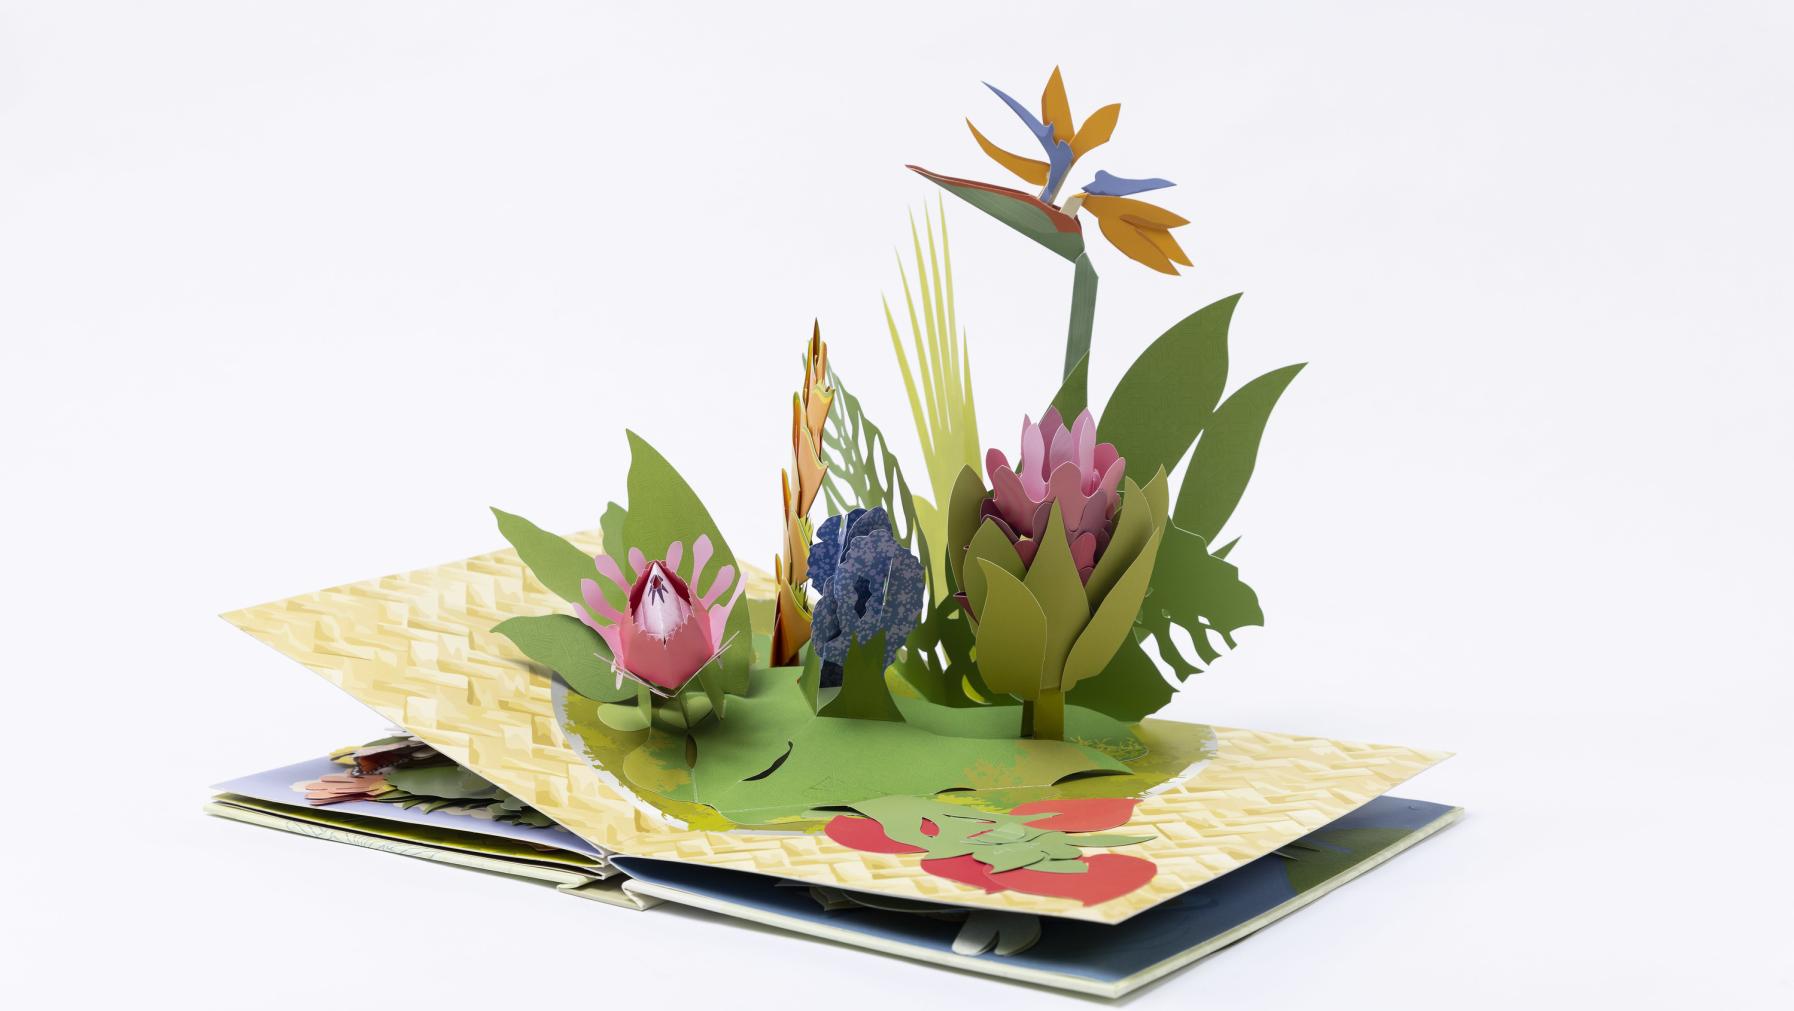 A scene from a pop-up book of intricate flower arrangements.